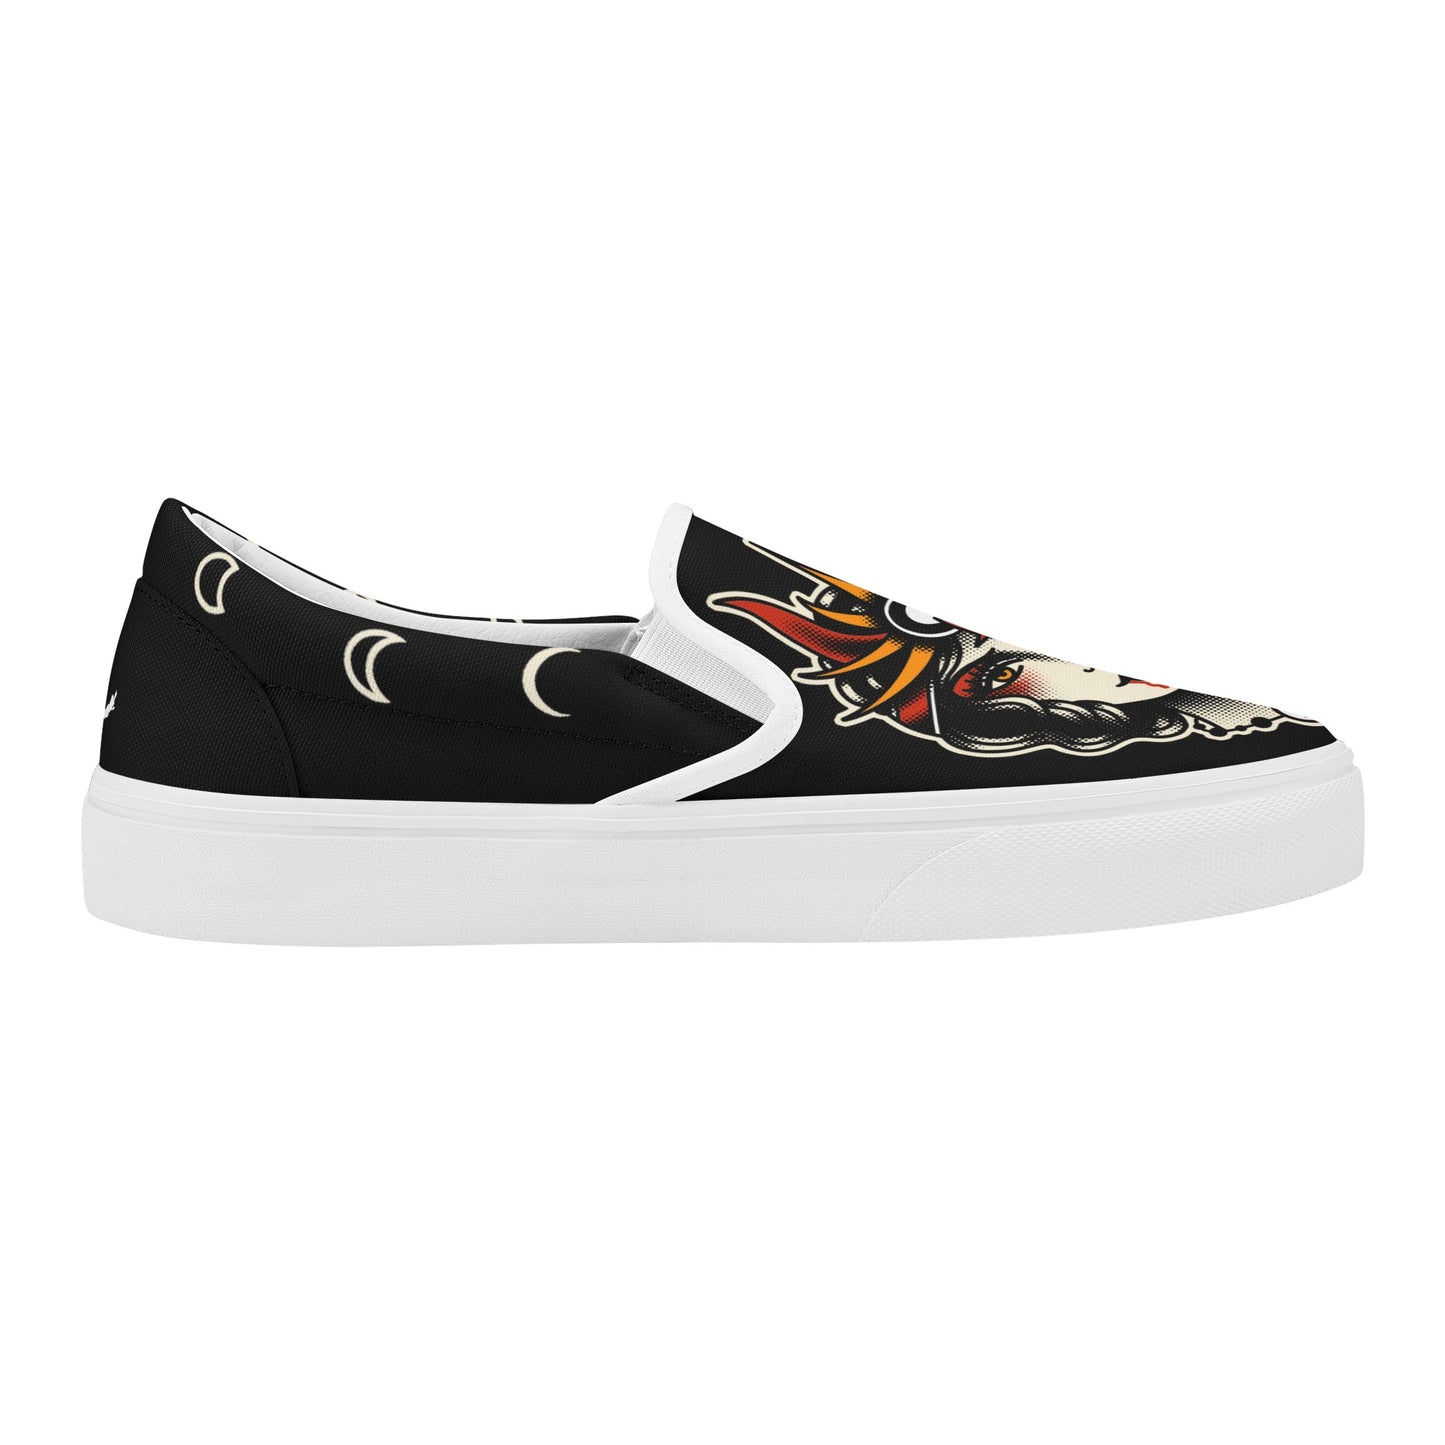 Lilith Skate Slip On Shoes